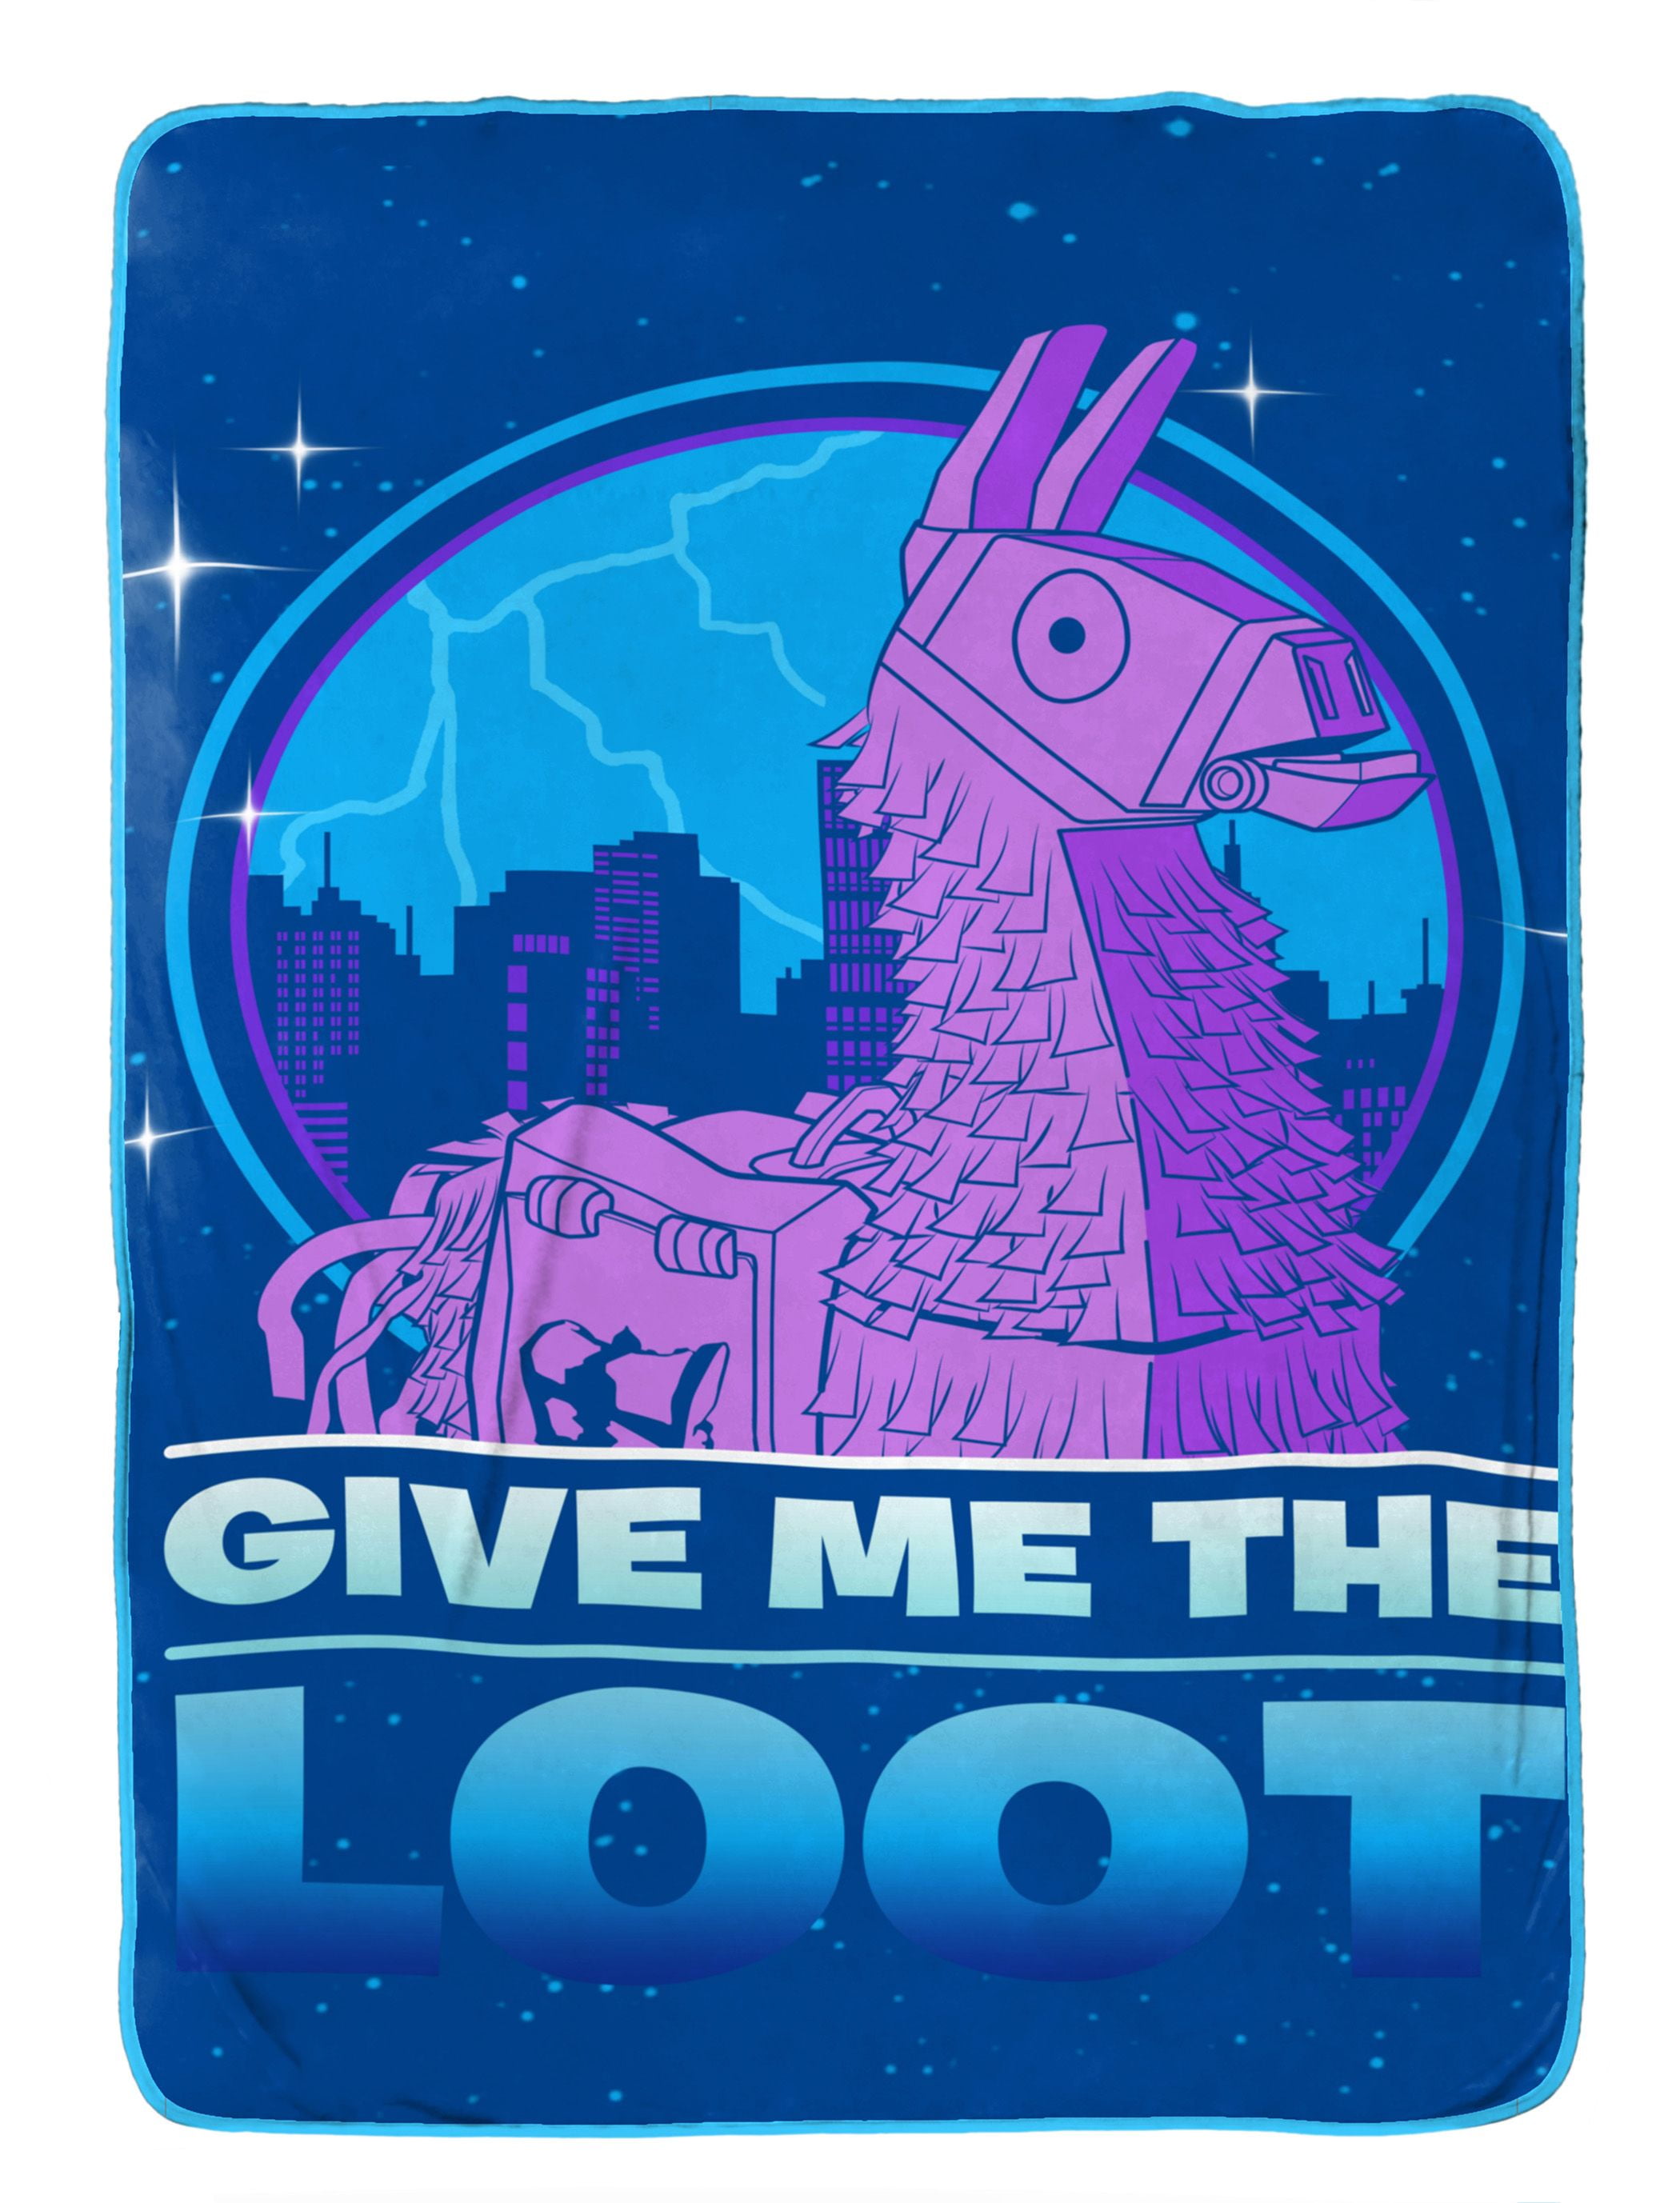 Details about   BRAND NEW Fortnite Loot Llama Silky Soft Throw Blanket 40 X 50 Inches Kids 